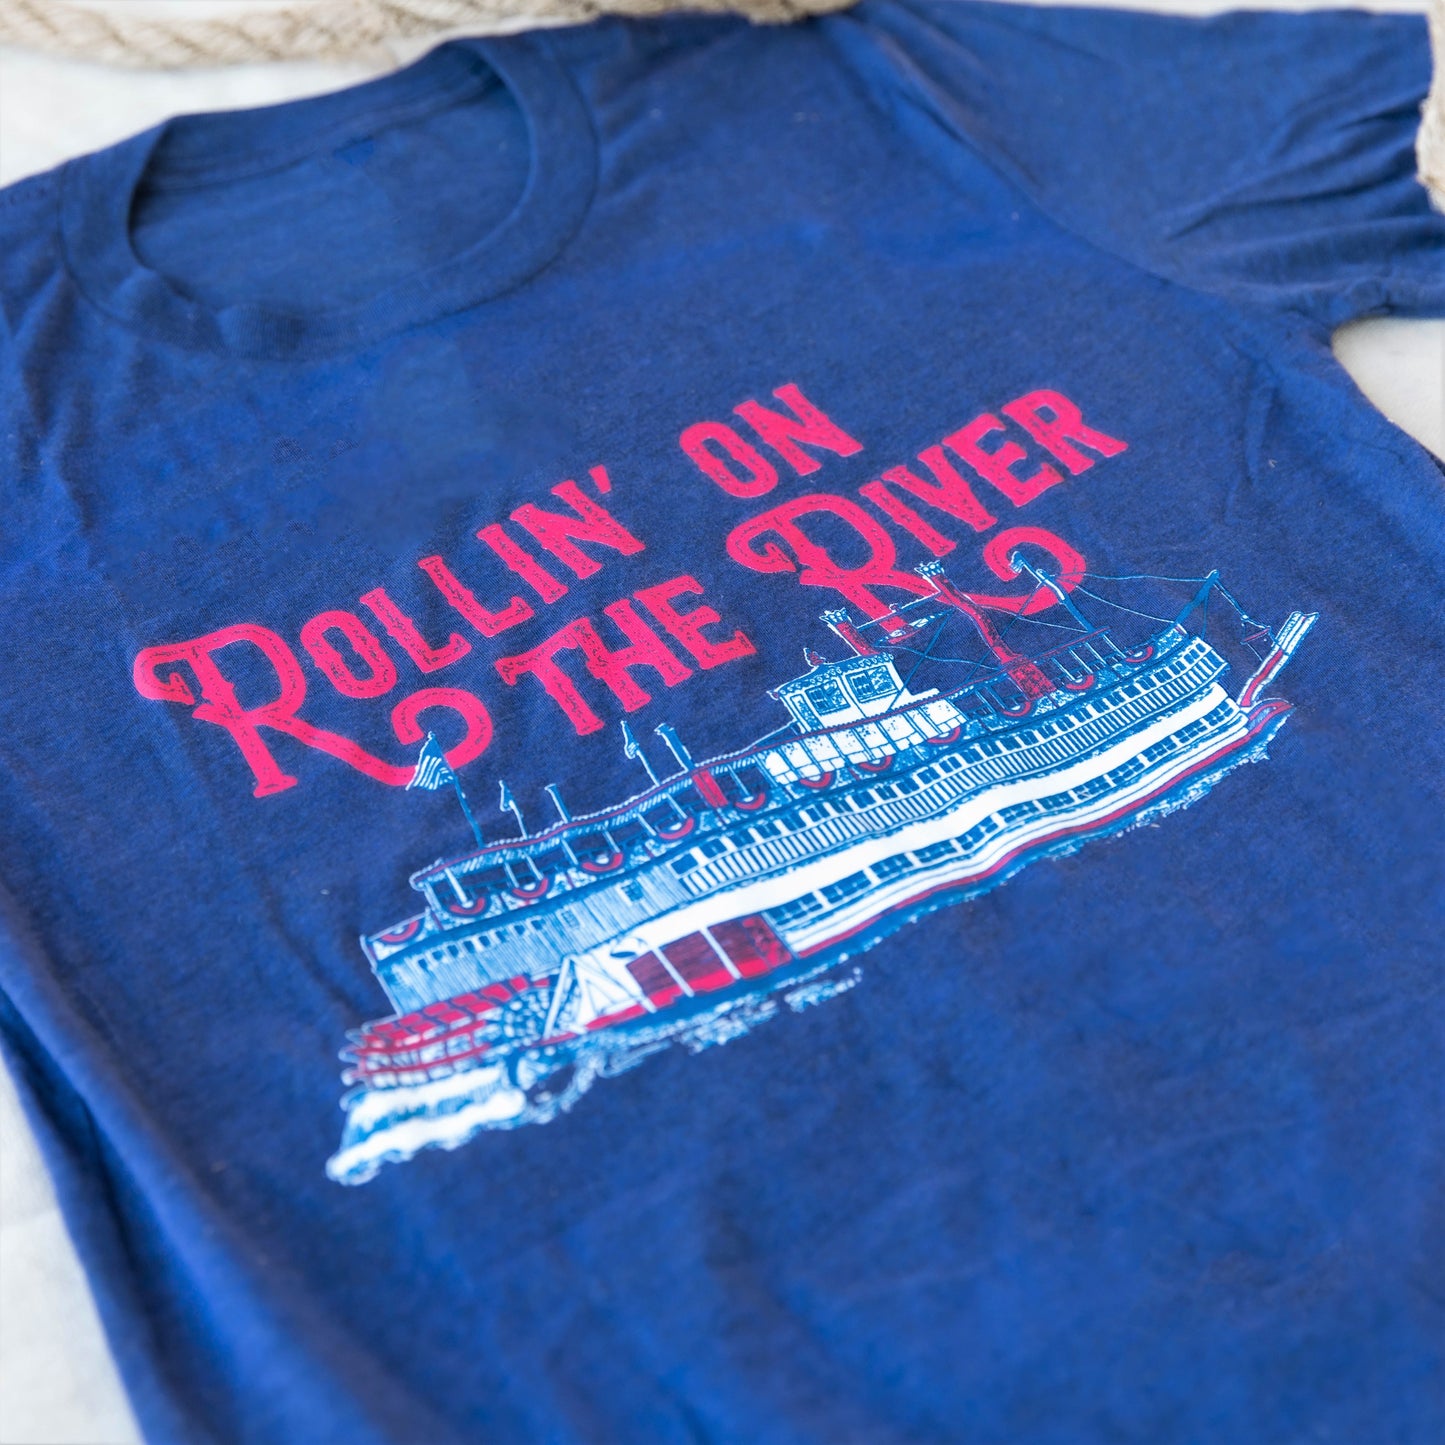 Rollin' On The River T-Shirt